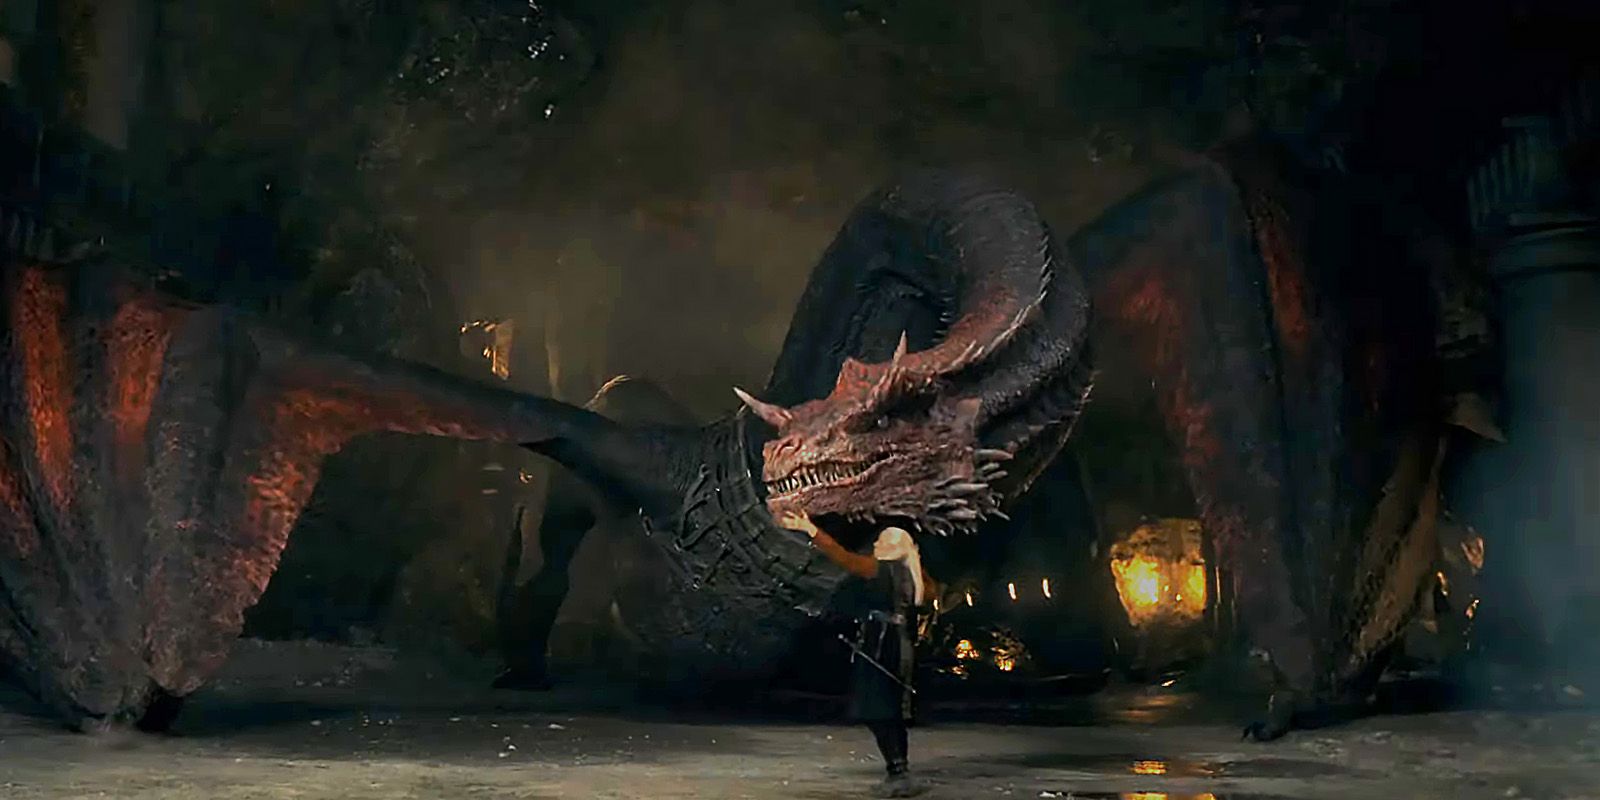 House of the Dragon - Watch the New Official Trailer